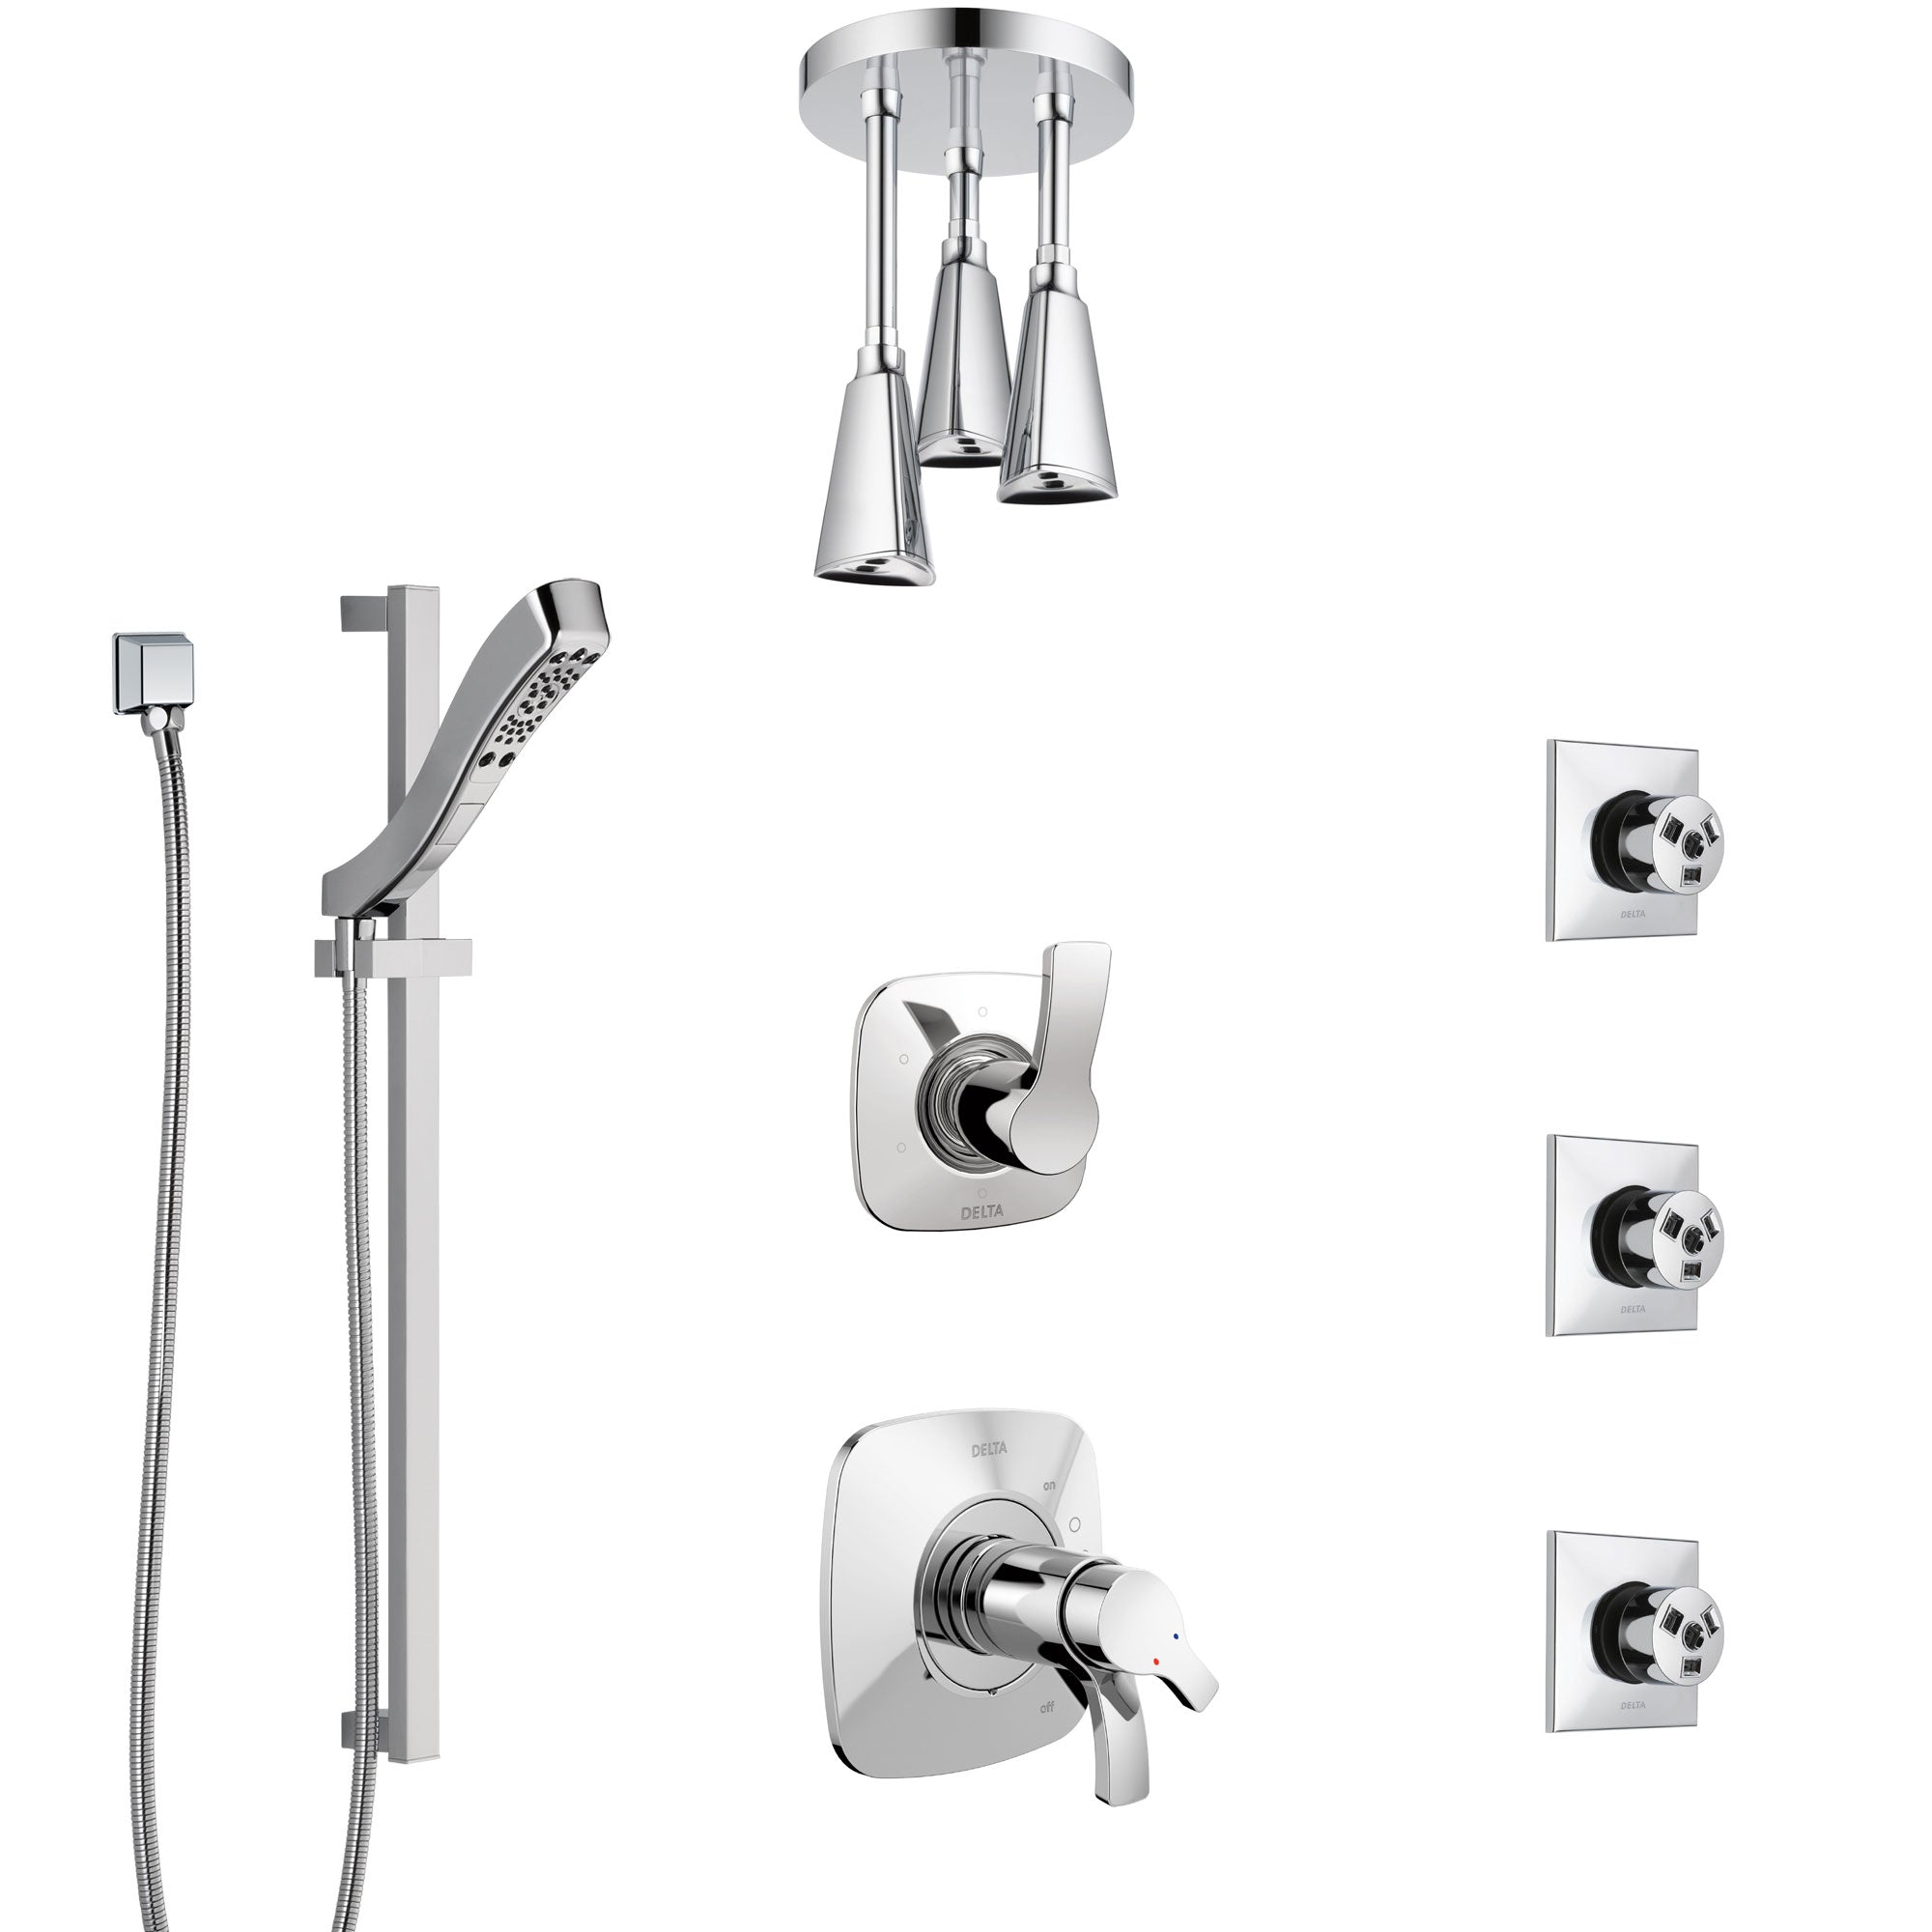 Delta Tesla Chrome Shower System with Dual Thermostatic Control, Diverter, Ceiling Mount Showerhead, 3 Body Sprays, and Hand Shower SS17T5213